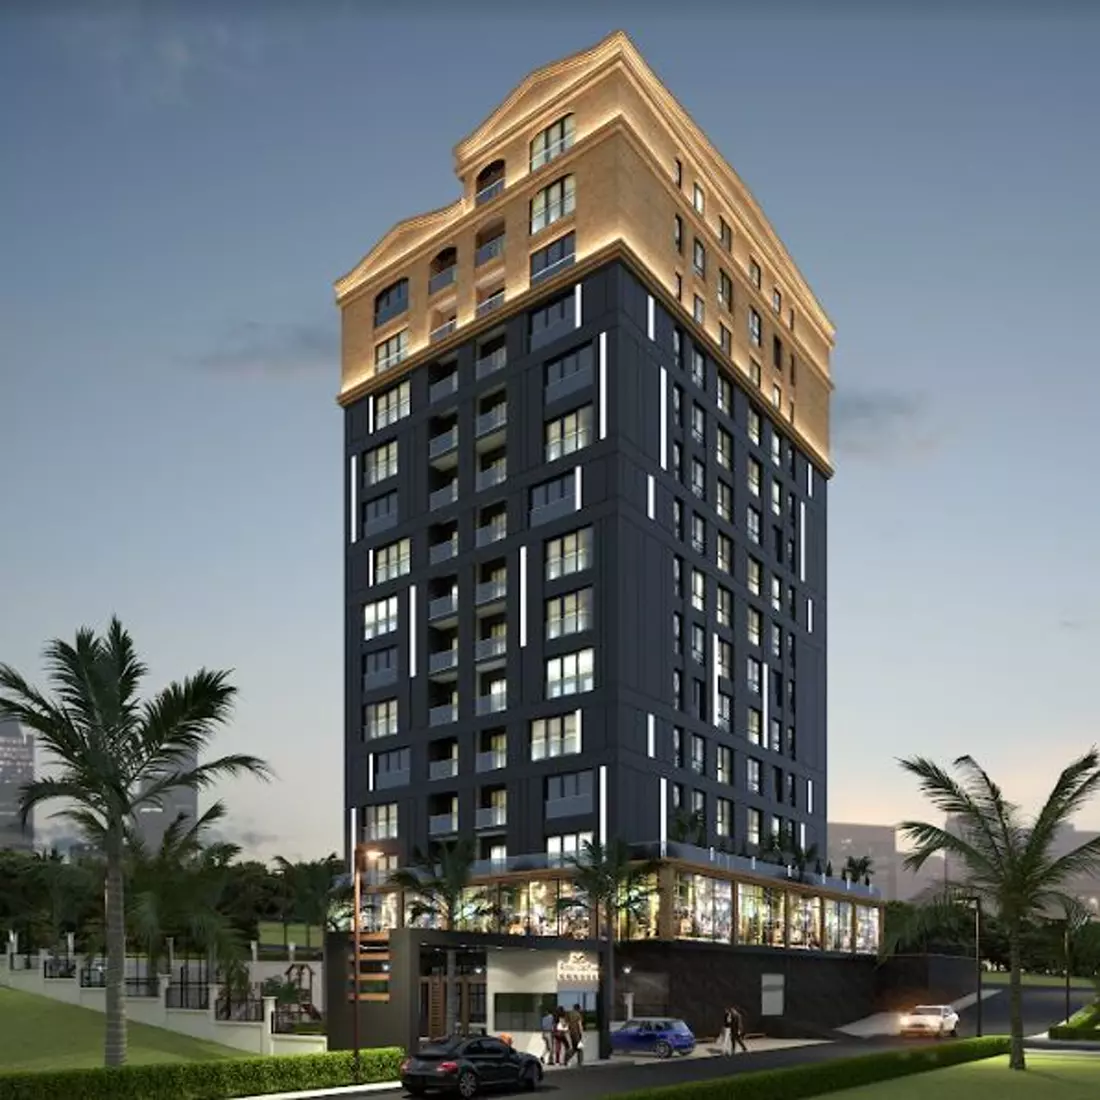 Prestigious Luxury Residences With Exclusive Amenities at Central Location